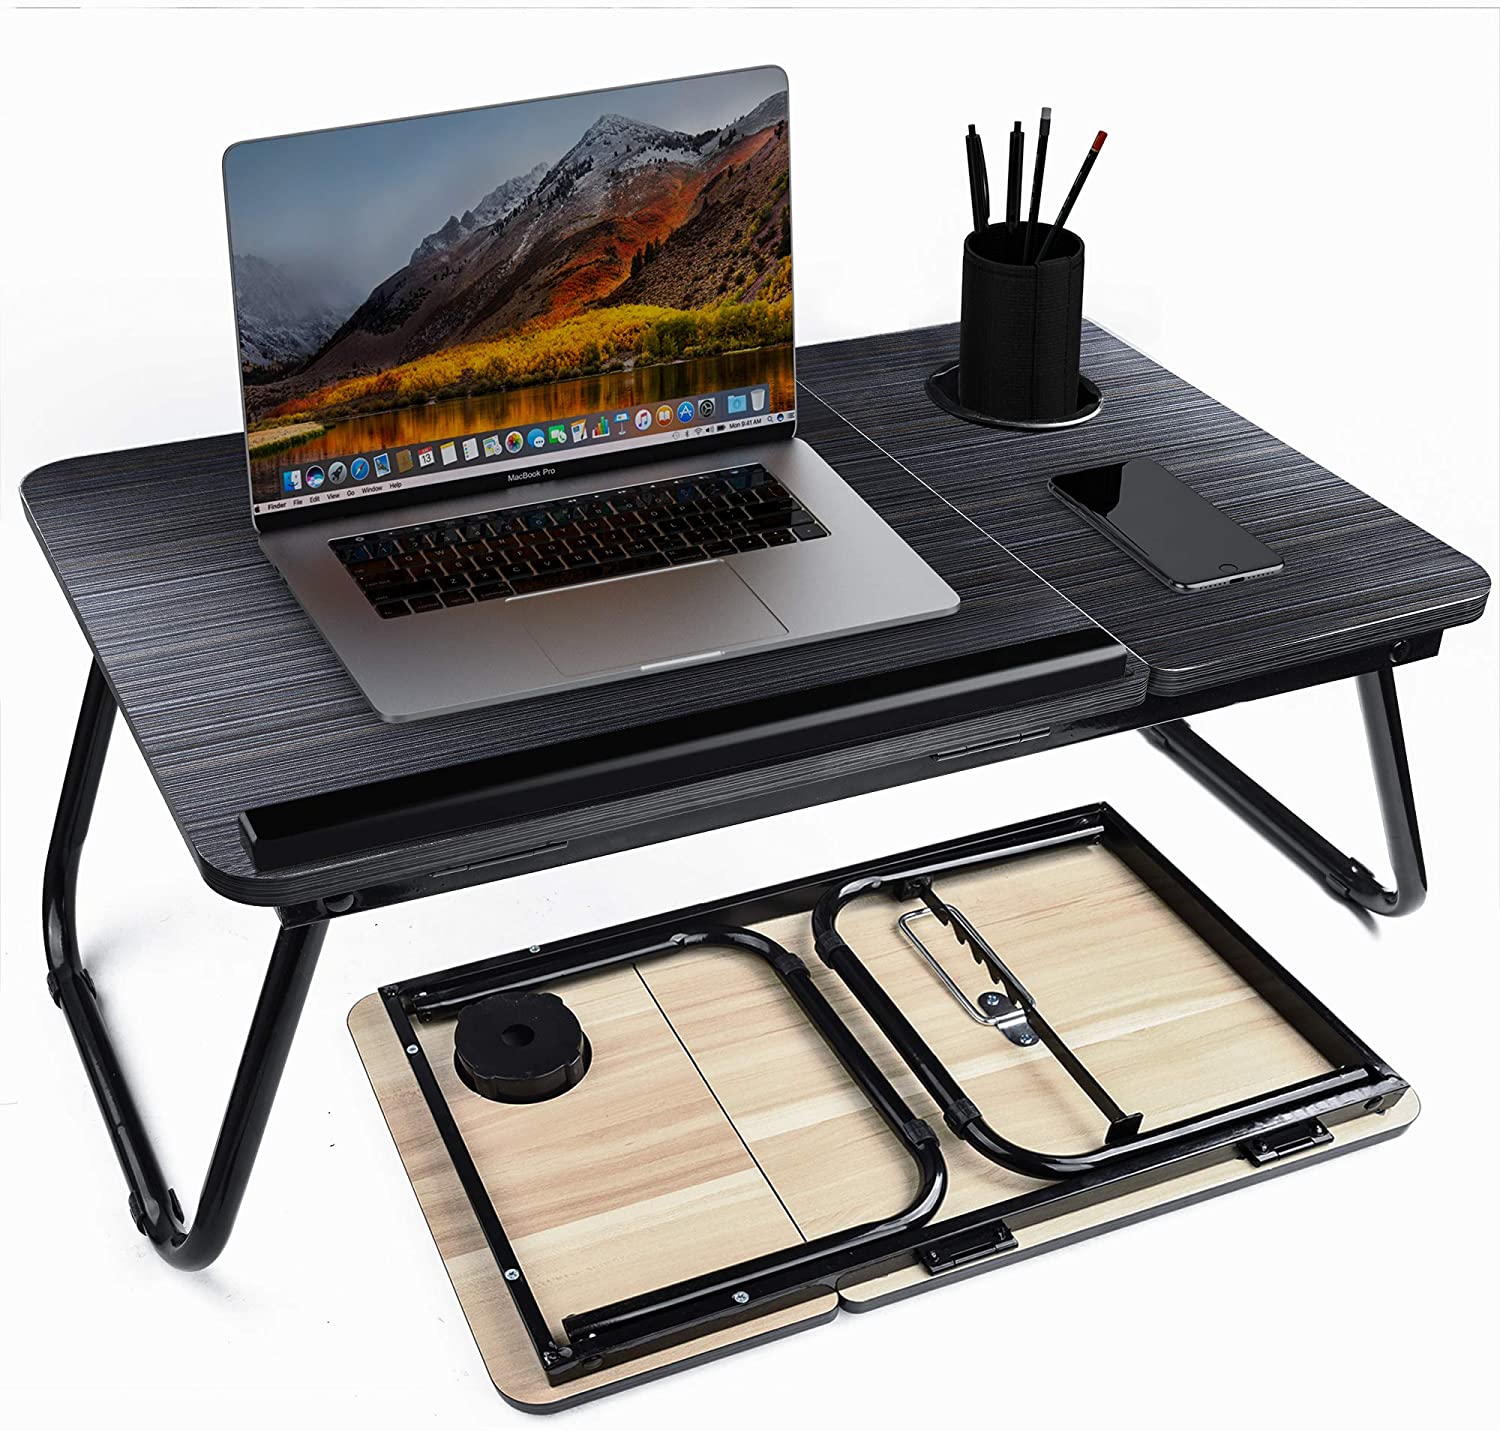 Khaki Large Bed Tray Foldable Portable Multifunction Laptop Desk Lazy Laptop Table for Student Dormitory Younger Small Desk Home Bedroom Multipurpose Tabletop 